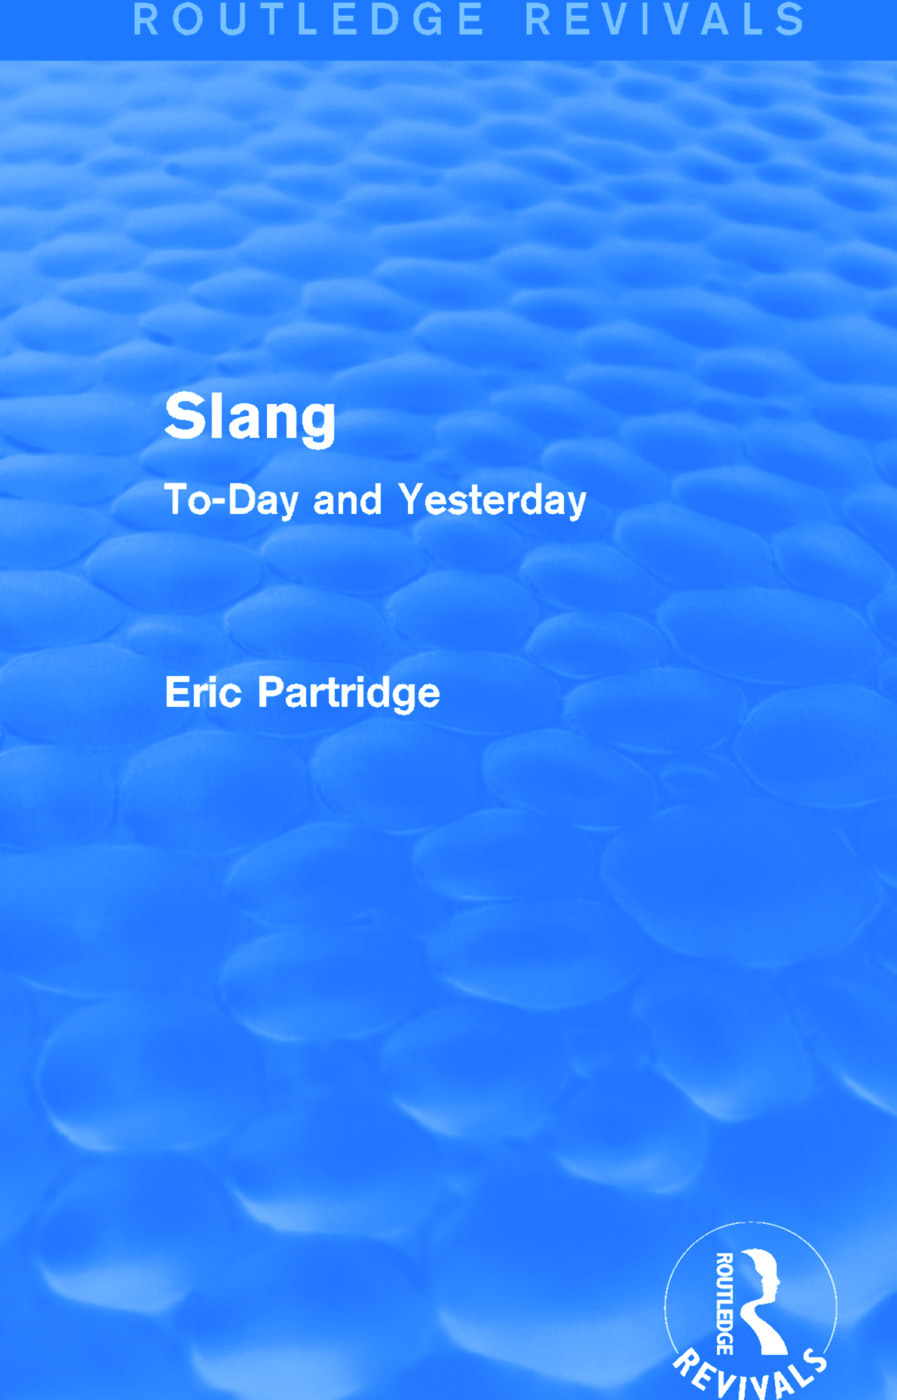 Slang: To-Day and Yesterday